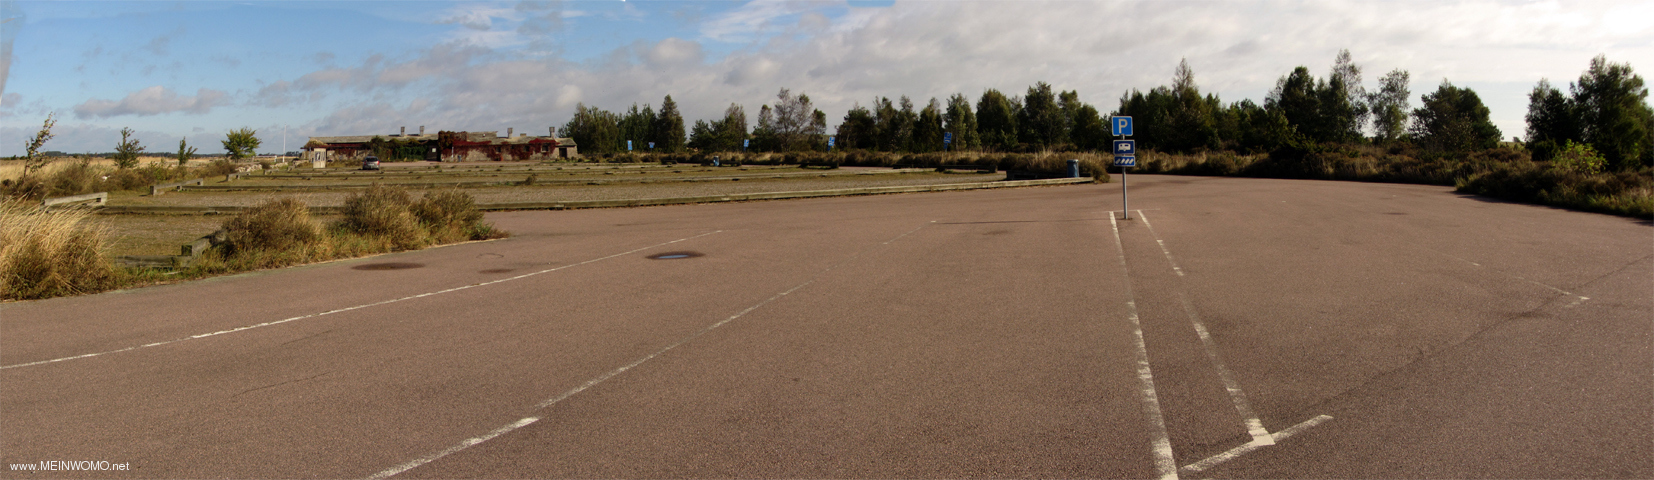  Look at the big parking space in front of the Eketorpsborg..  In September we are here almost alone ...